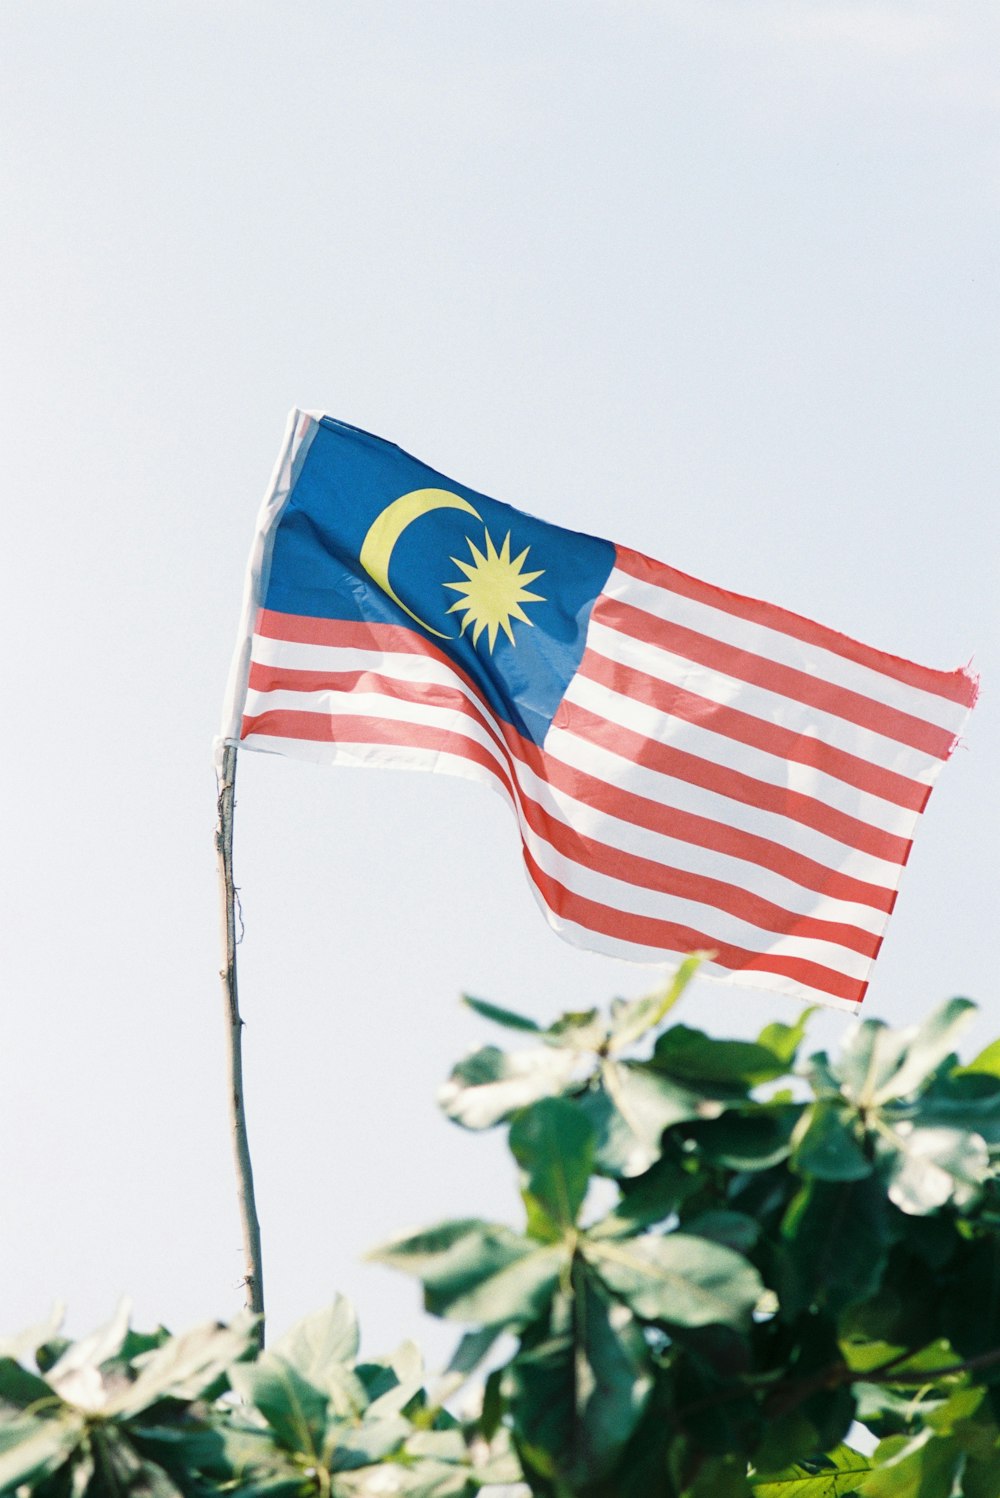 a malaysian flag flying in the wind